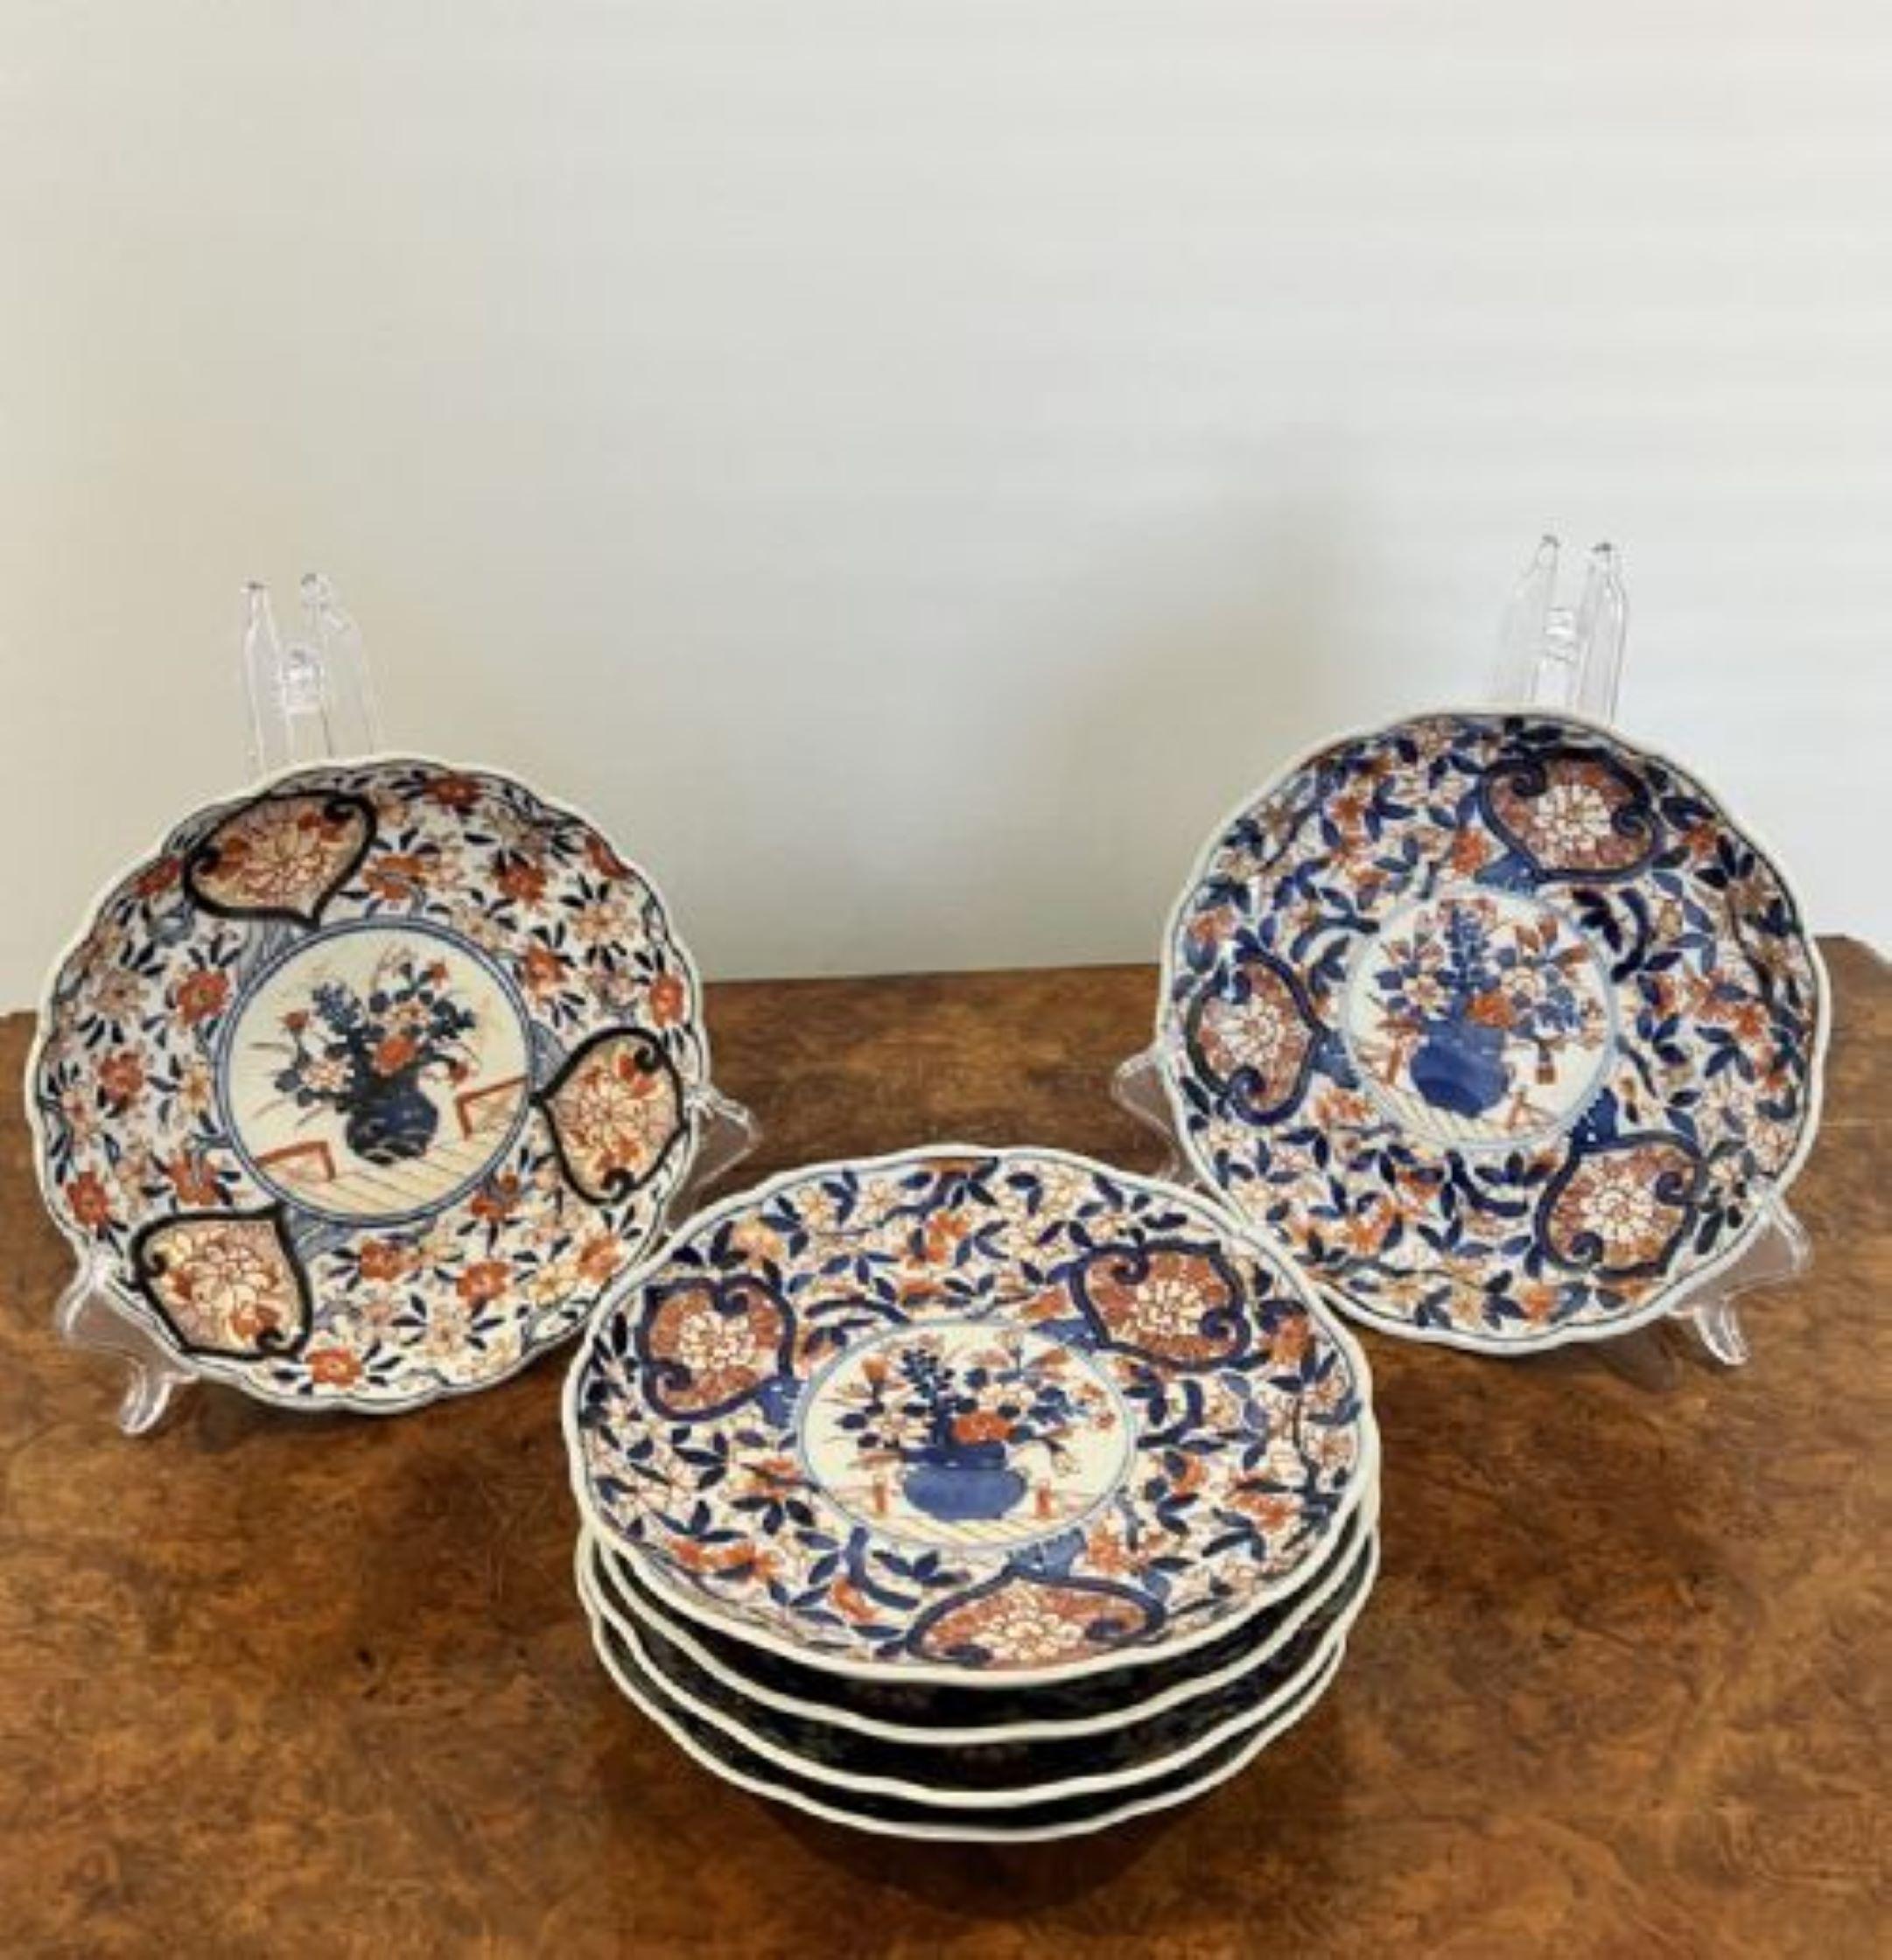 Unusual set of six antique Japanese quality Imari plates having a quality set of six original antique Japanese Imari plates in wonderful red, blue and white colours with floral decoration 